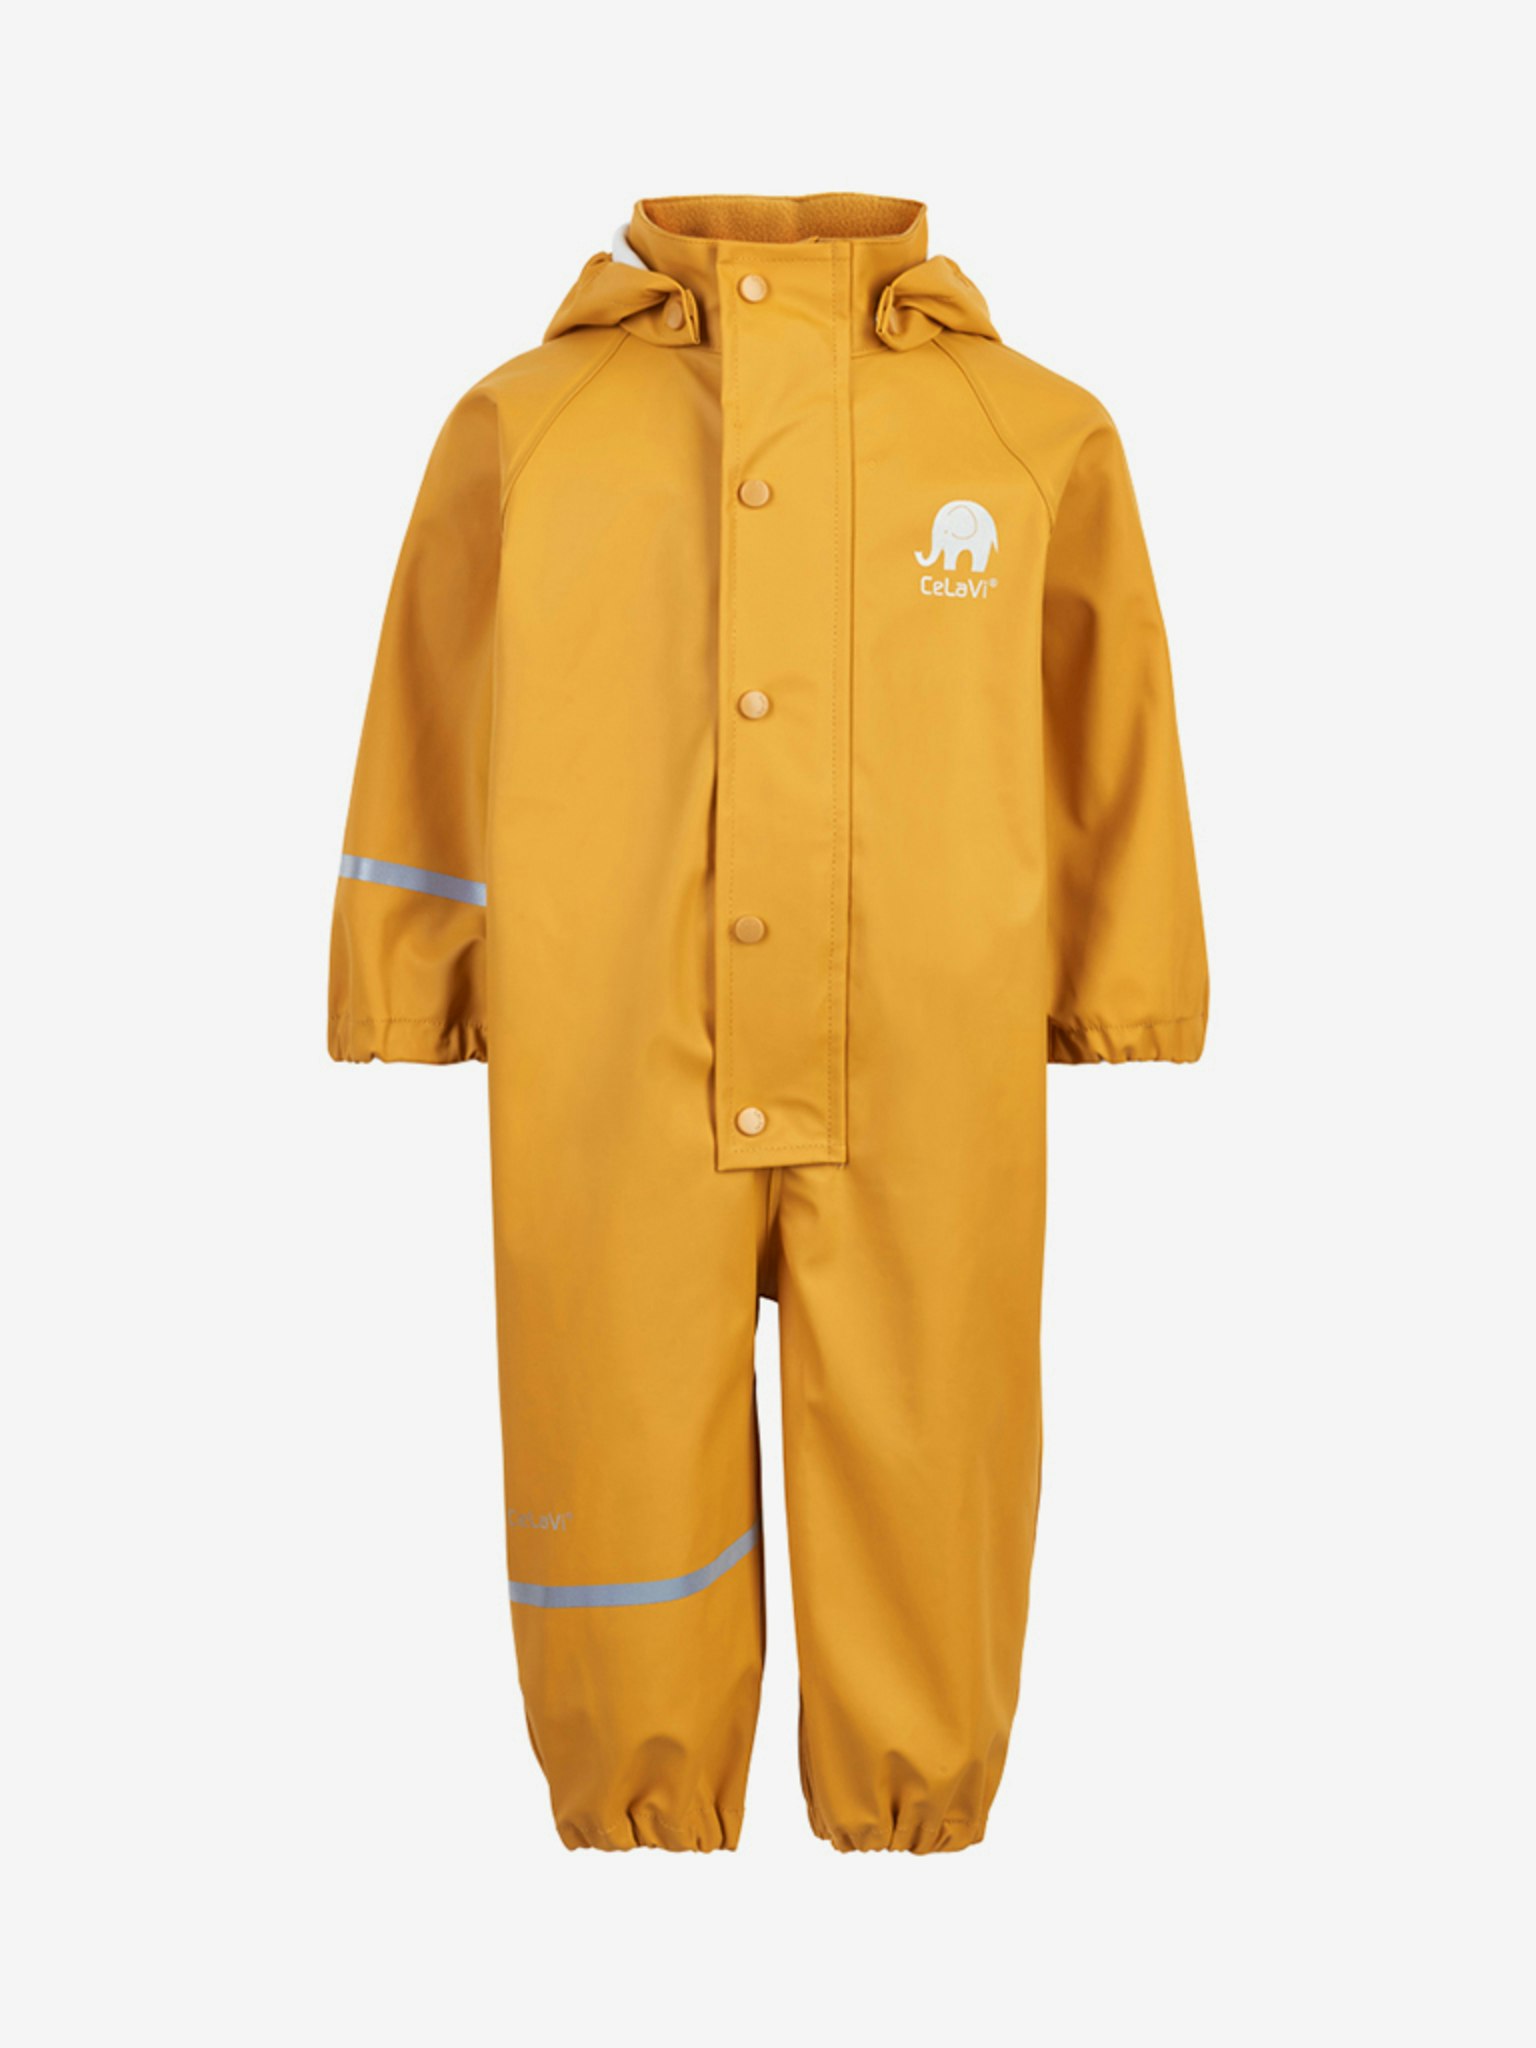 CeLaVi - Rainwear Suit -Solid PU/ Regnoverall- Mineral Yellow